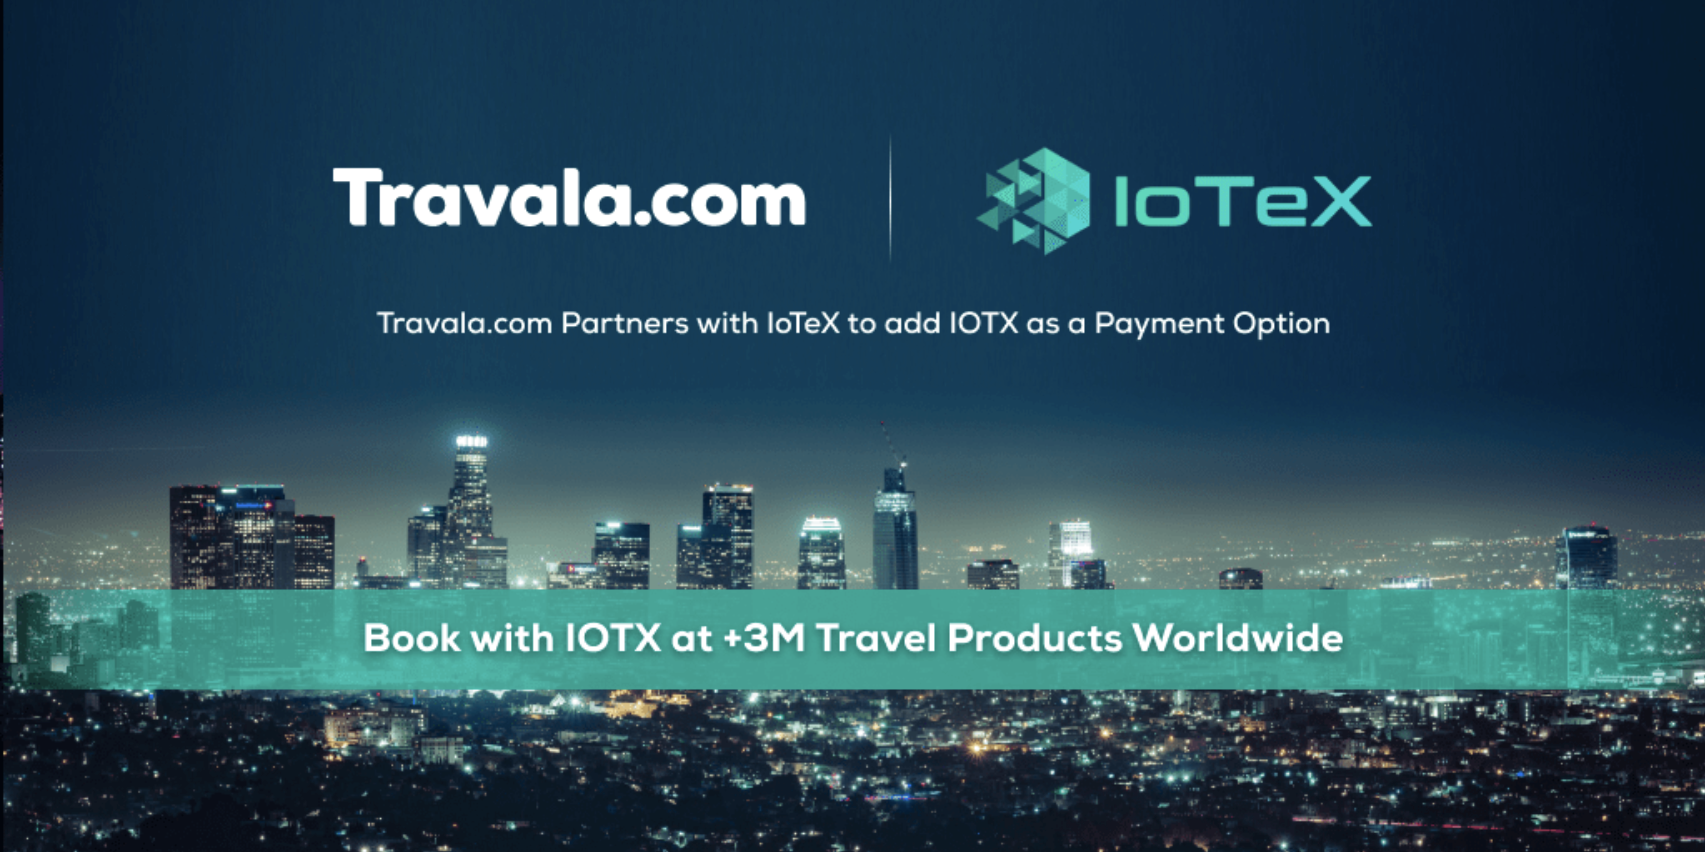 IoTeX & Travala Partner to Enable IOTX Payments for >3 Million Flights, Hotels, and Travel Experiences